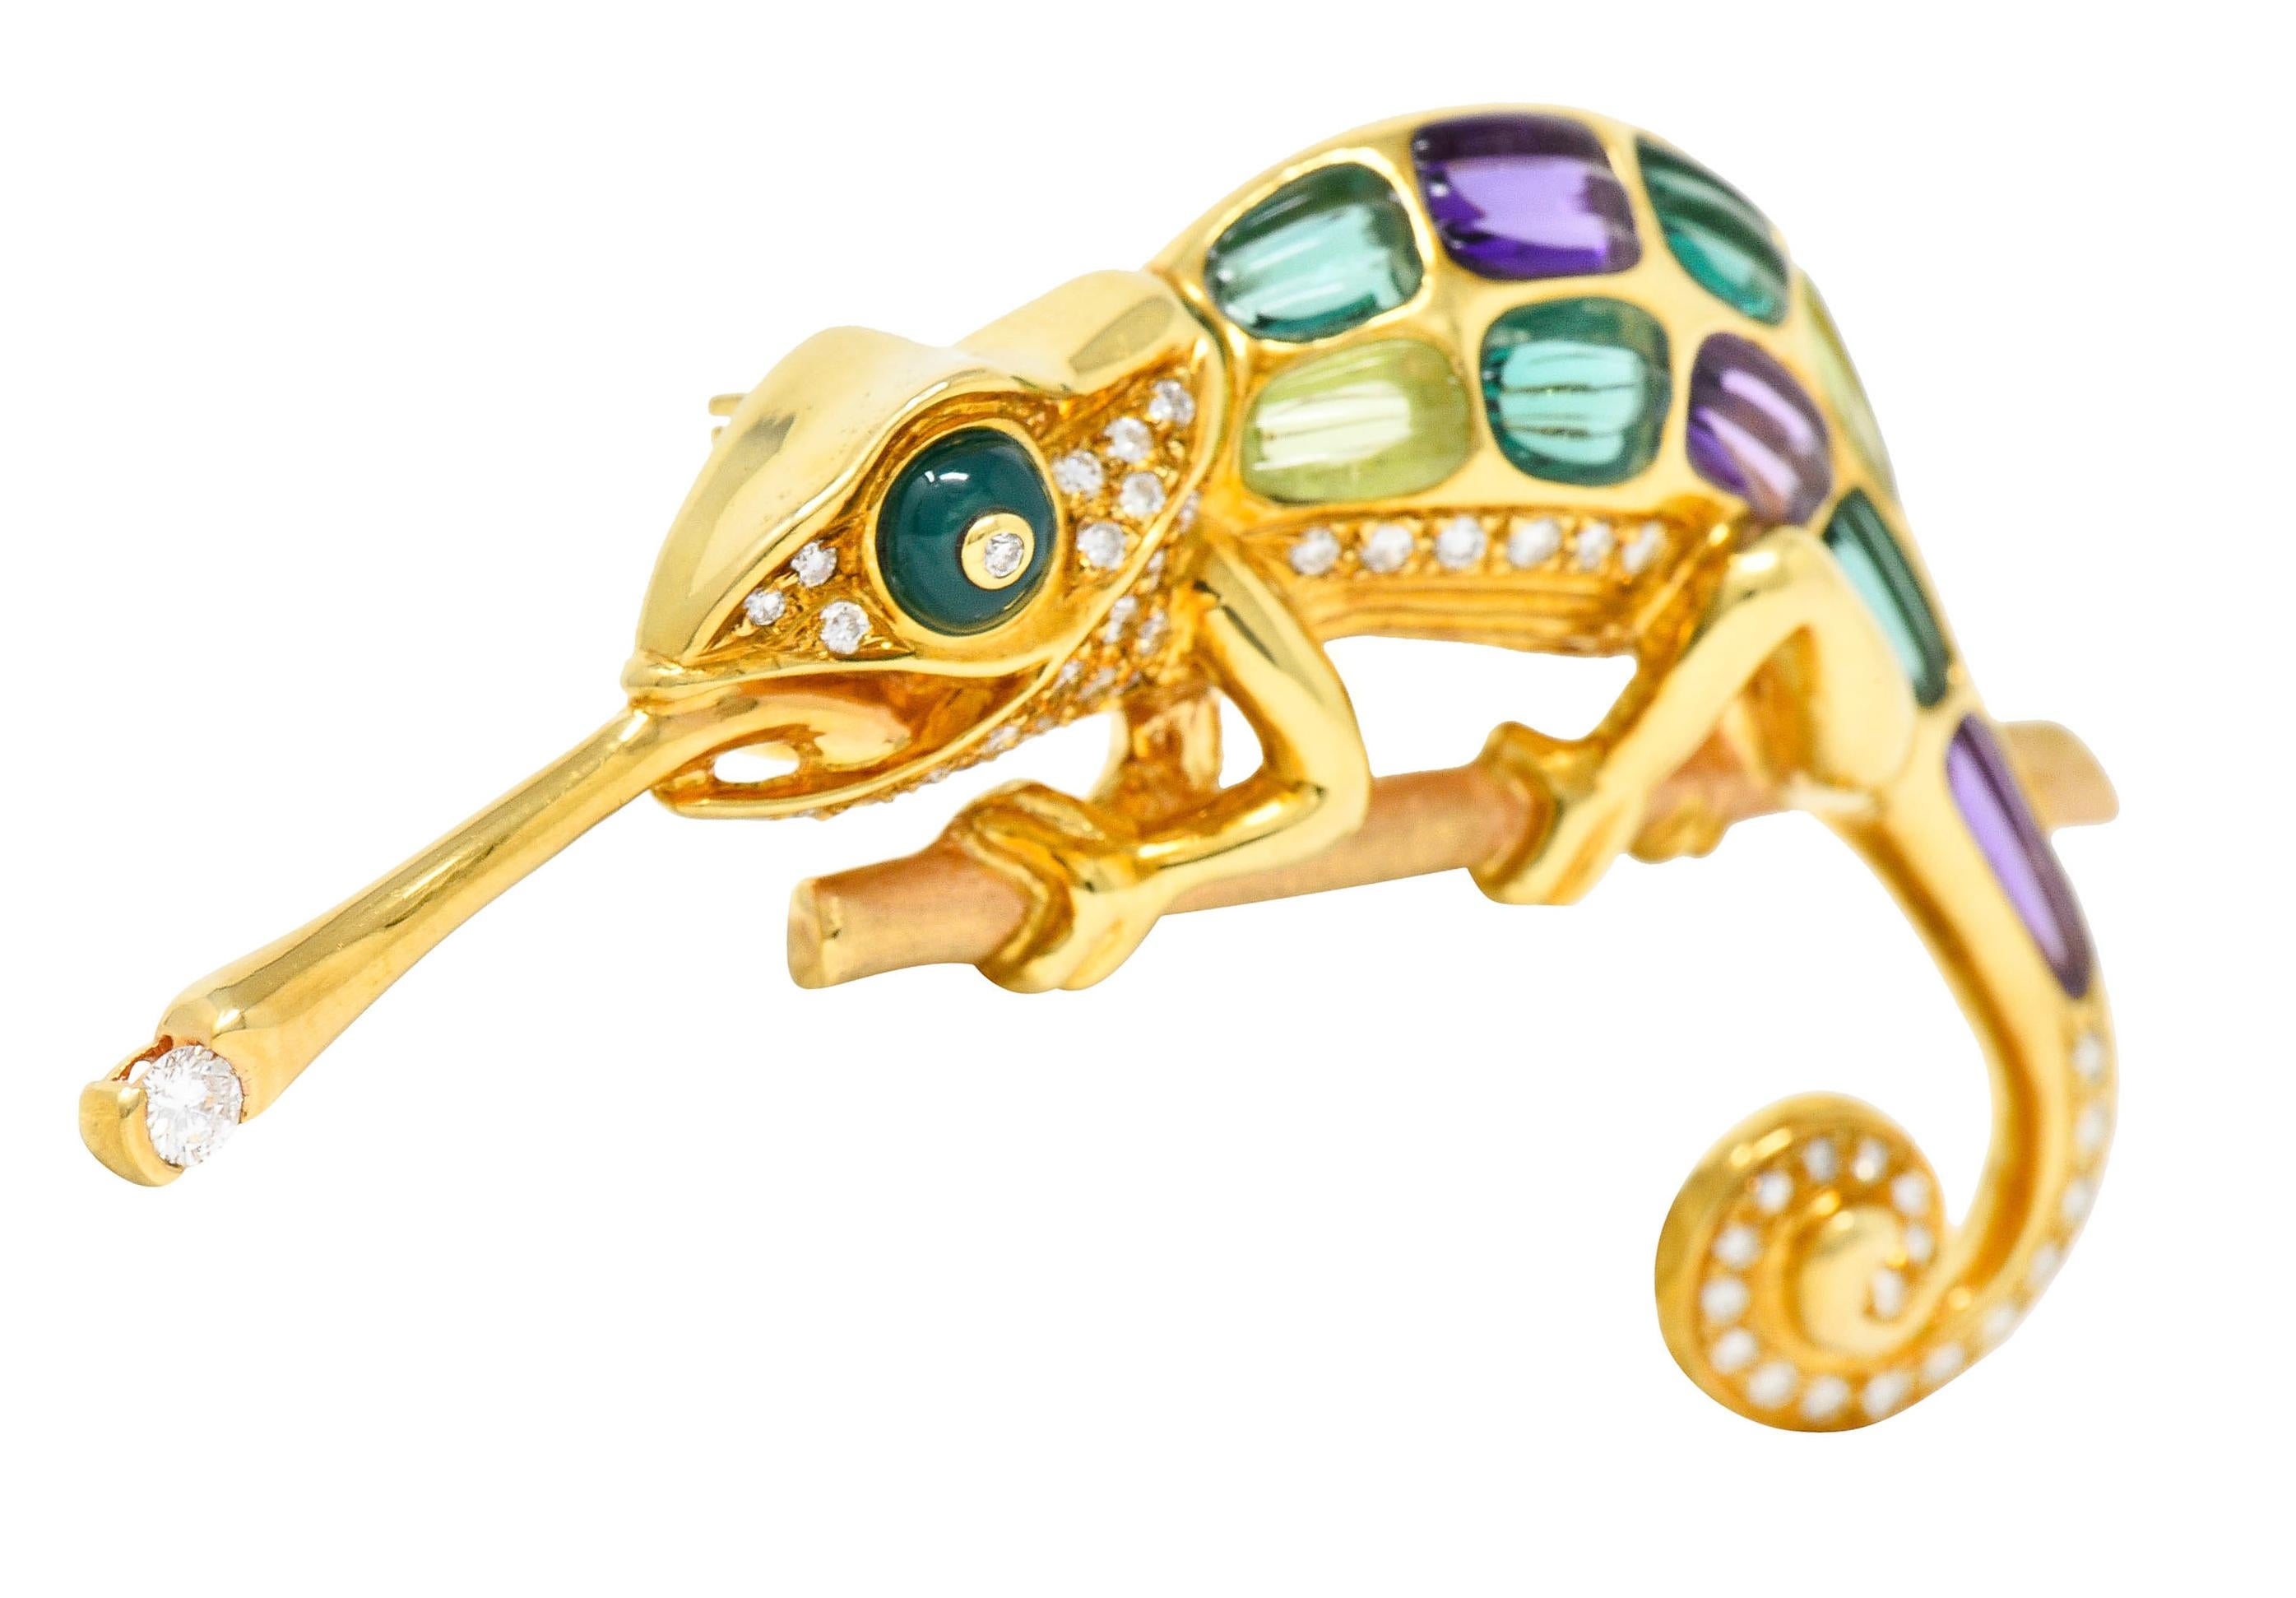 Designed as a highly stylized chameleon with a protruding tongue and a spiraled tail

Clutching a finely matte finished gold branch

Featuring a round chrysoprase cabochon eye with carved amethyst, chrysoberyl, and green tourmaline

Bead set with